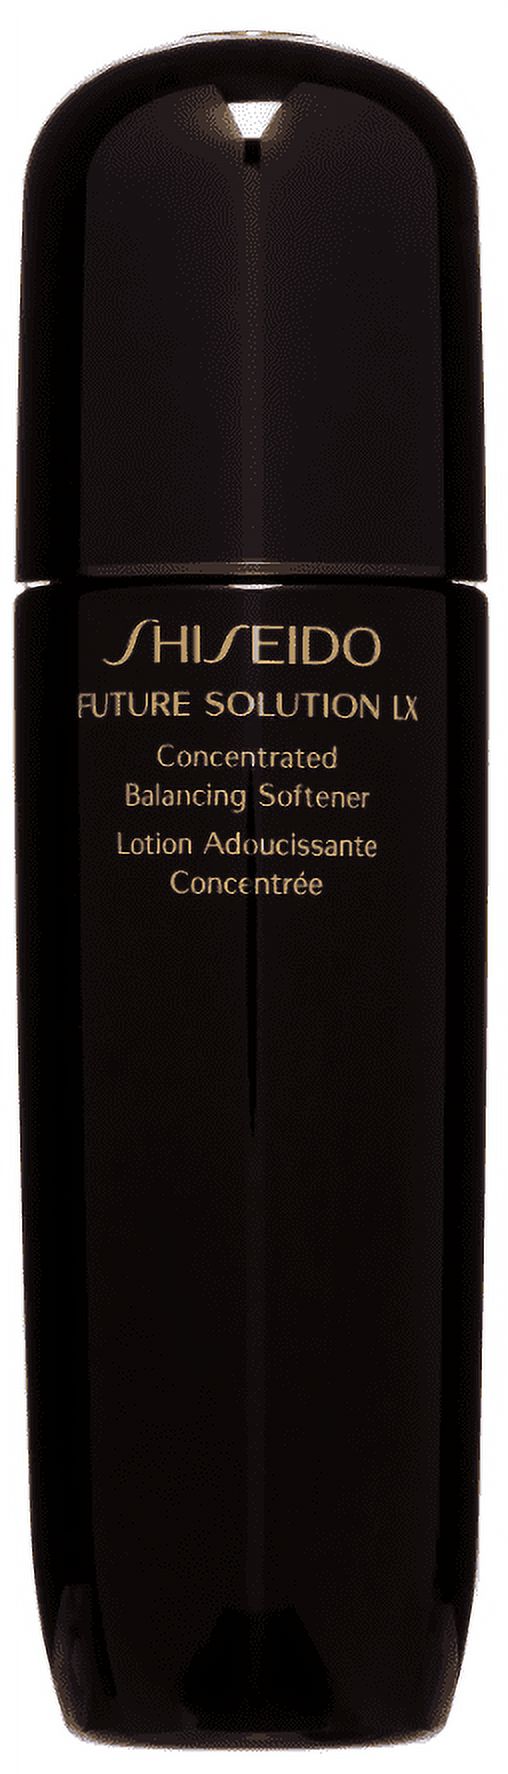 Shiseido Future Solution LX Concentrated Balancing Softener Face Lotion, 5 oz - image 1 of 11